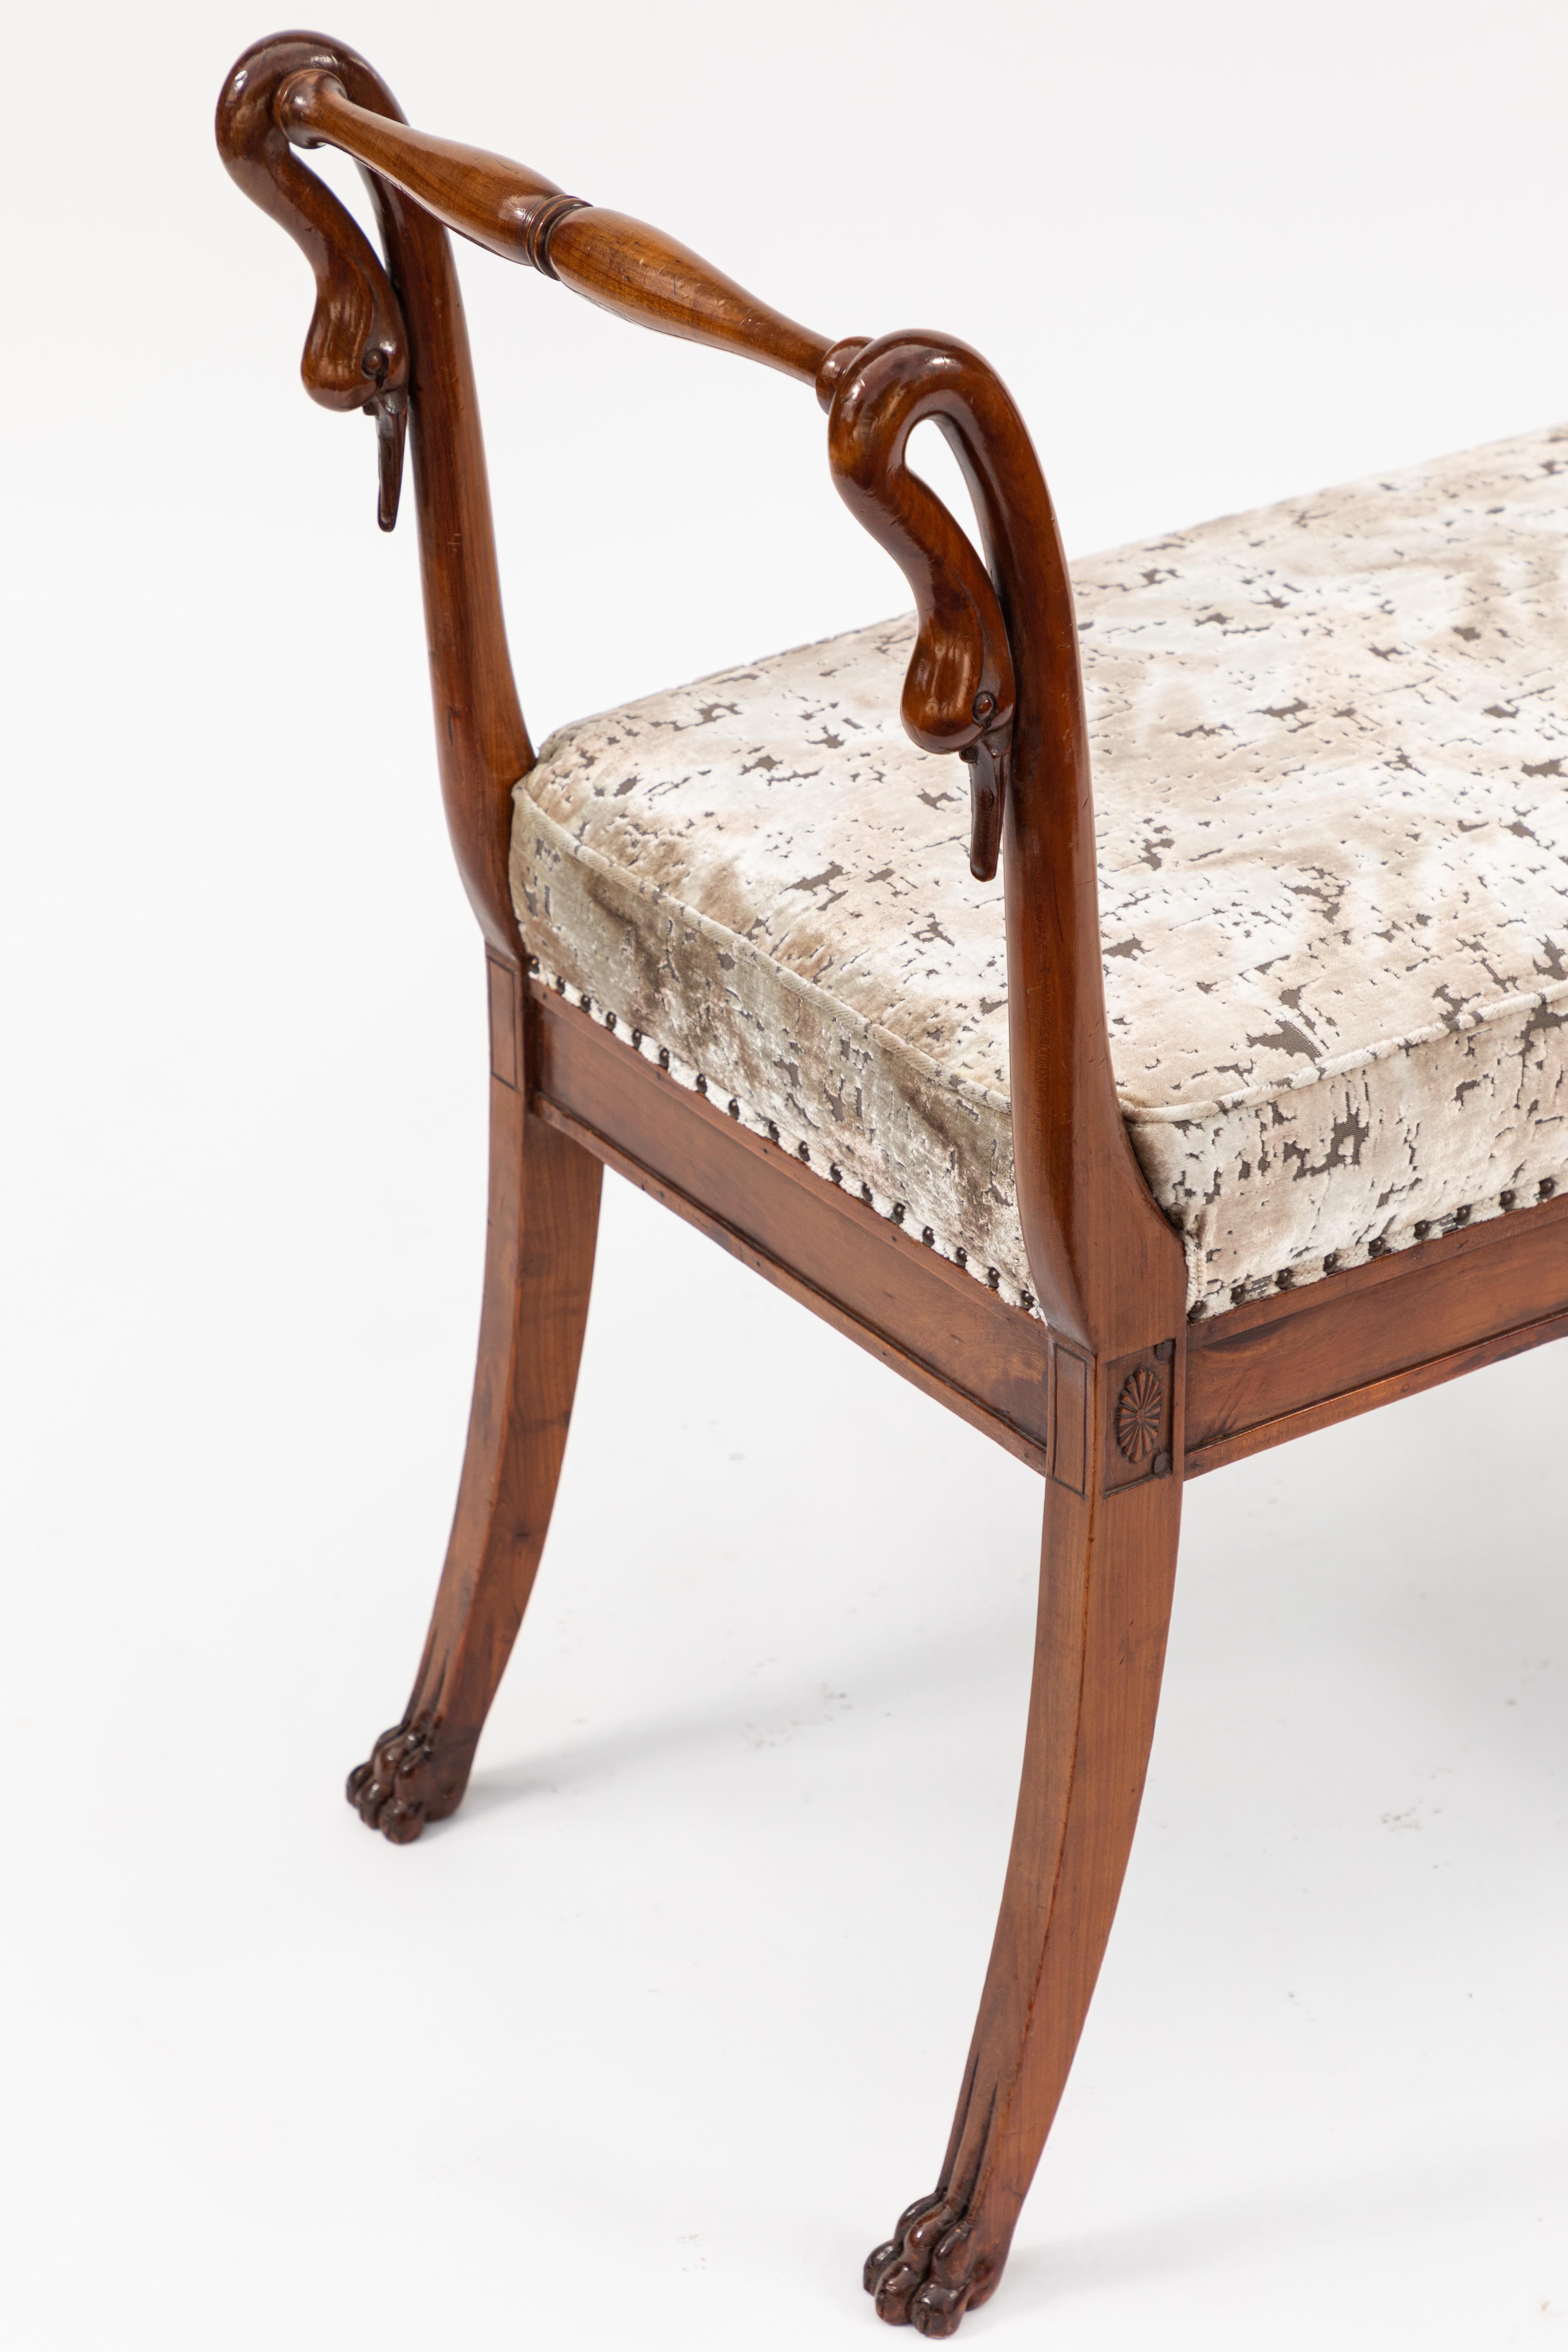 Early 19th century French Empire walnut bench with carved swan motif. Newly upholstered in contemporary velvet.